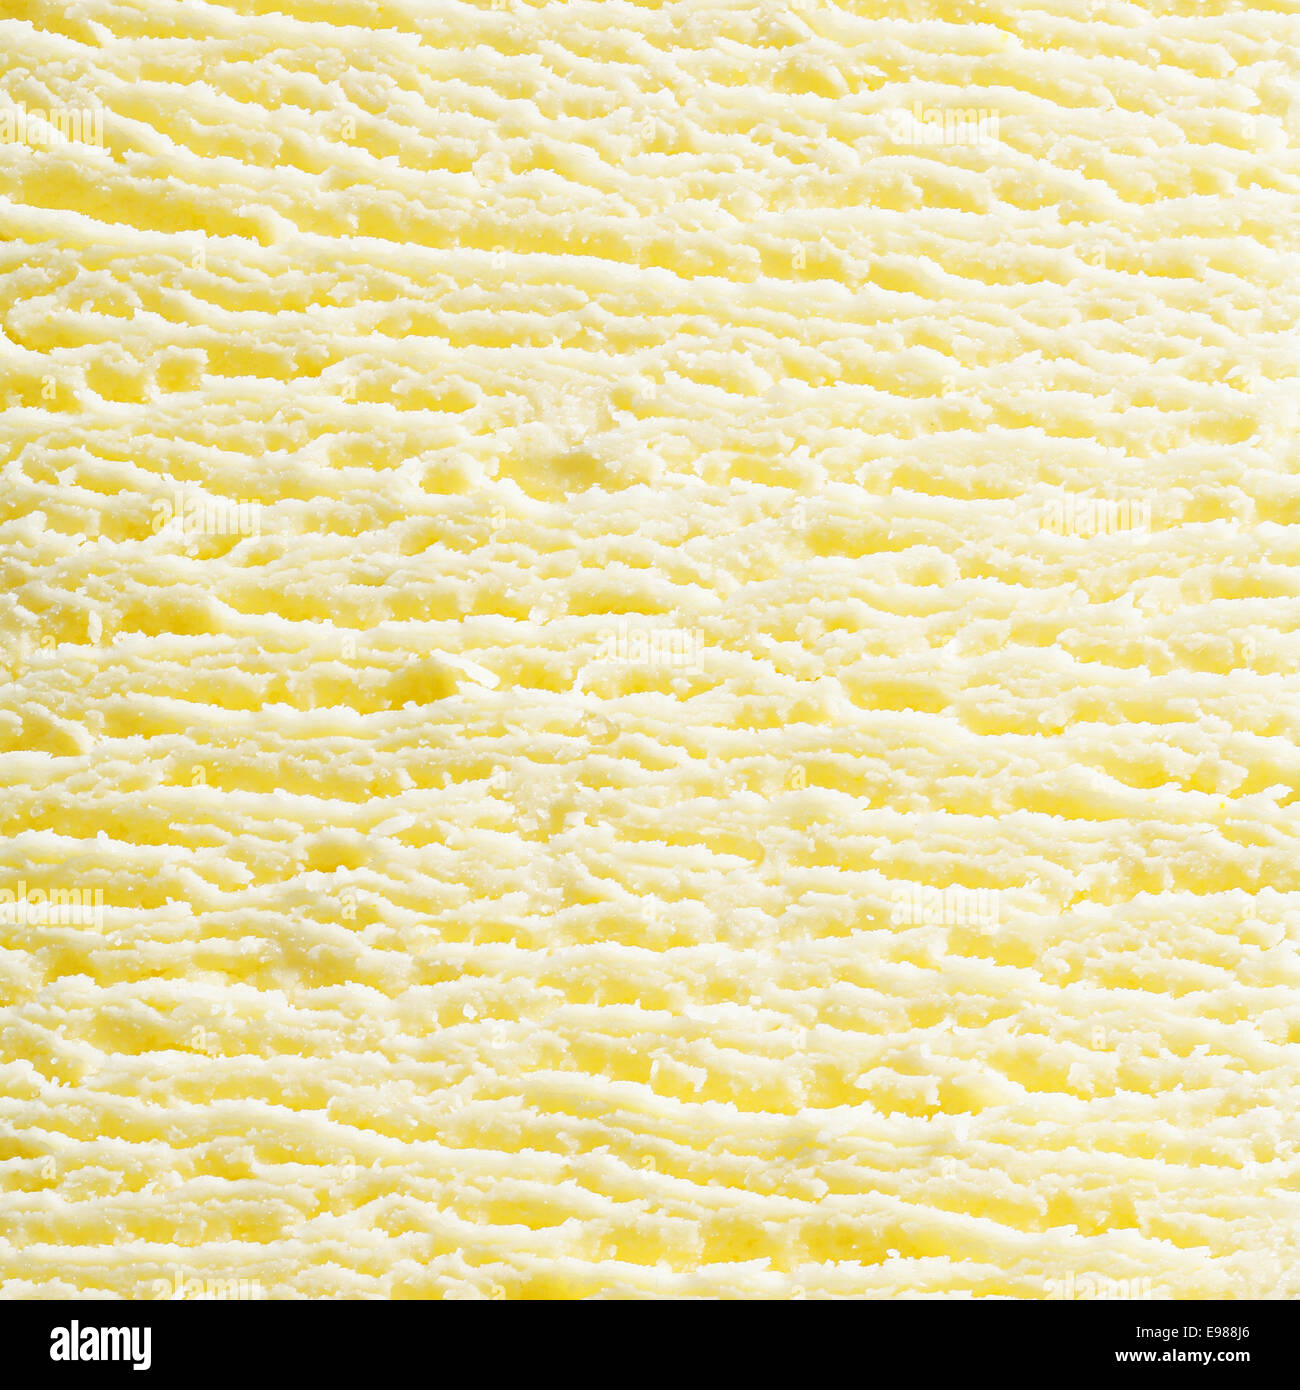 Macro abstract background of the surface texture of scoop of fresh creamy frozen vanilla icecream in square format. For ice-cream concept look at my portfolio Stock Photo